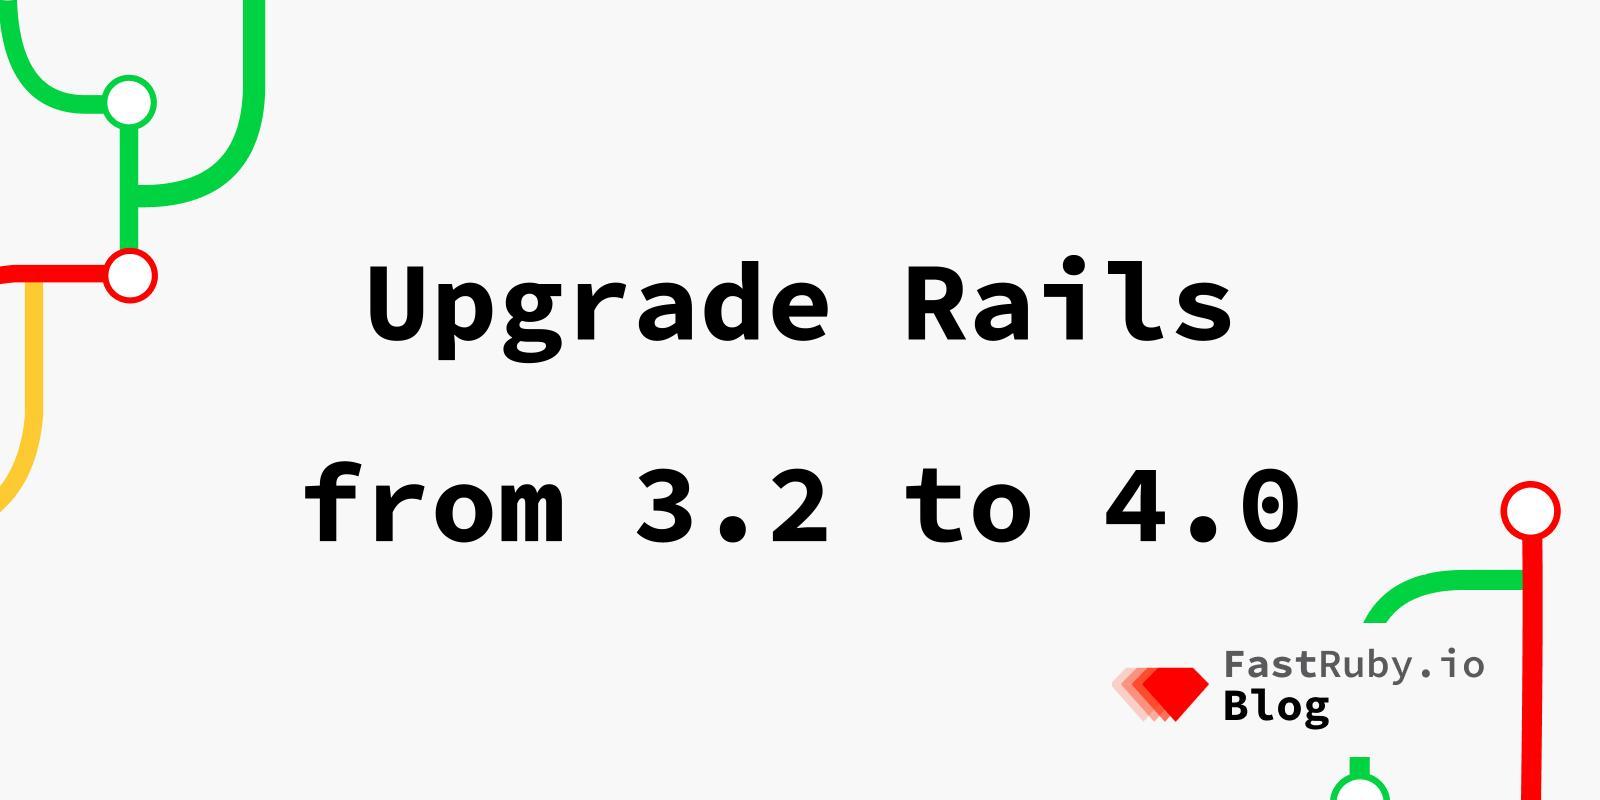 Upgrade Rails from 3.2 to 4.0